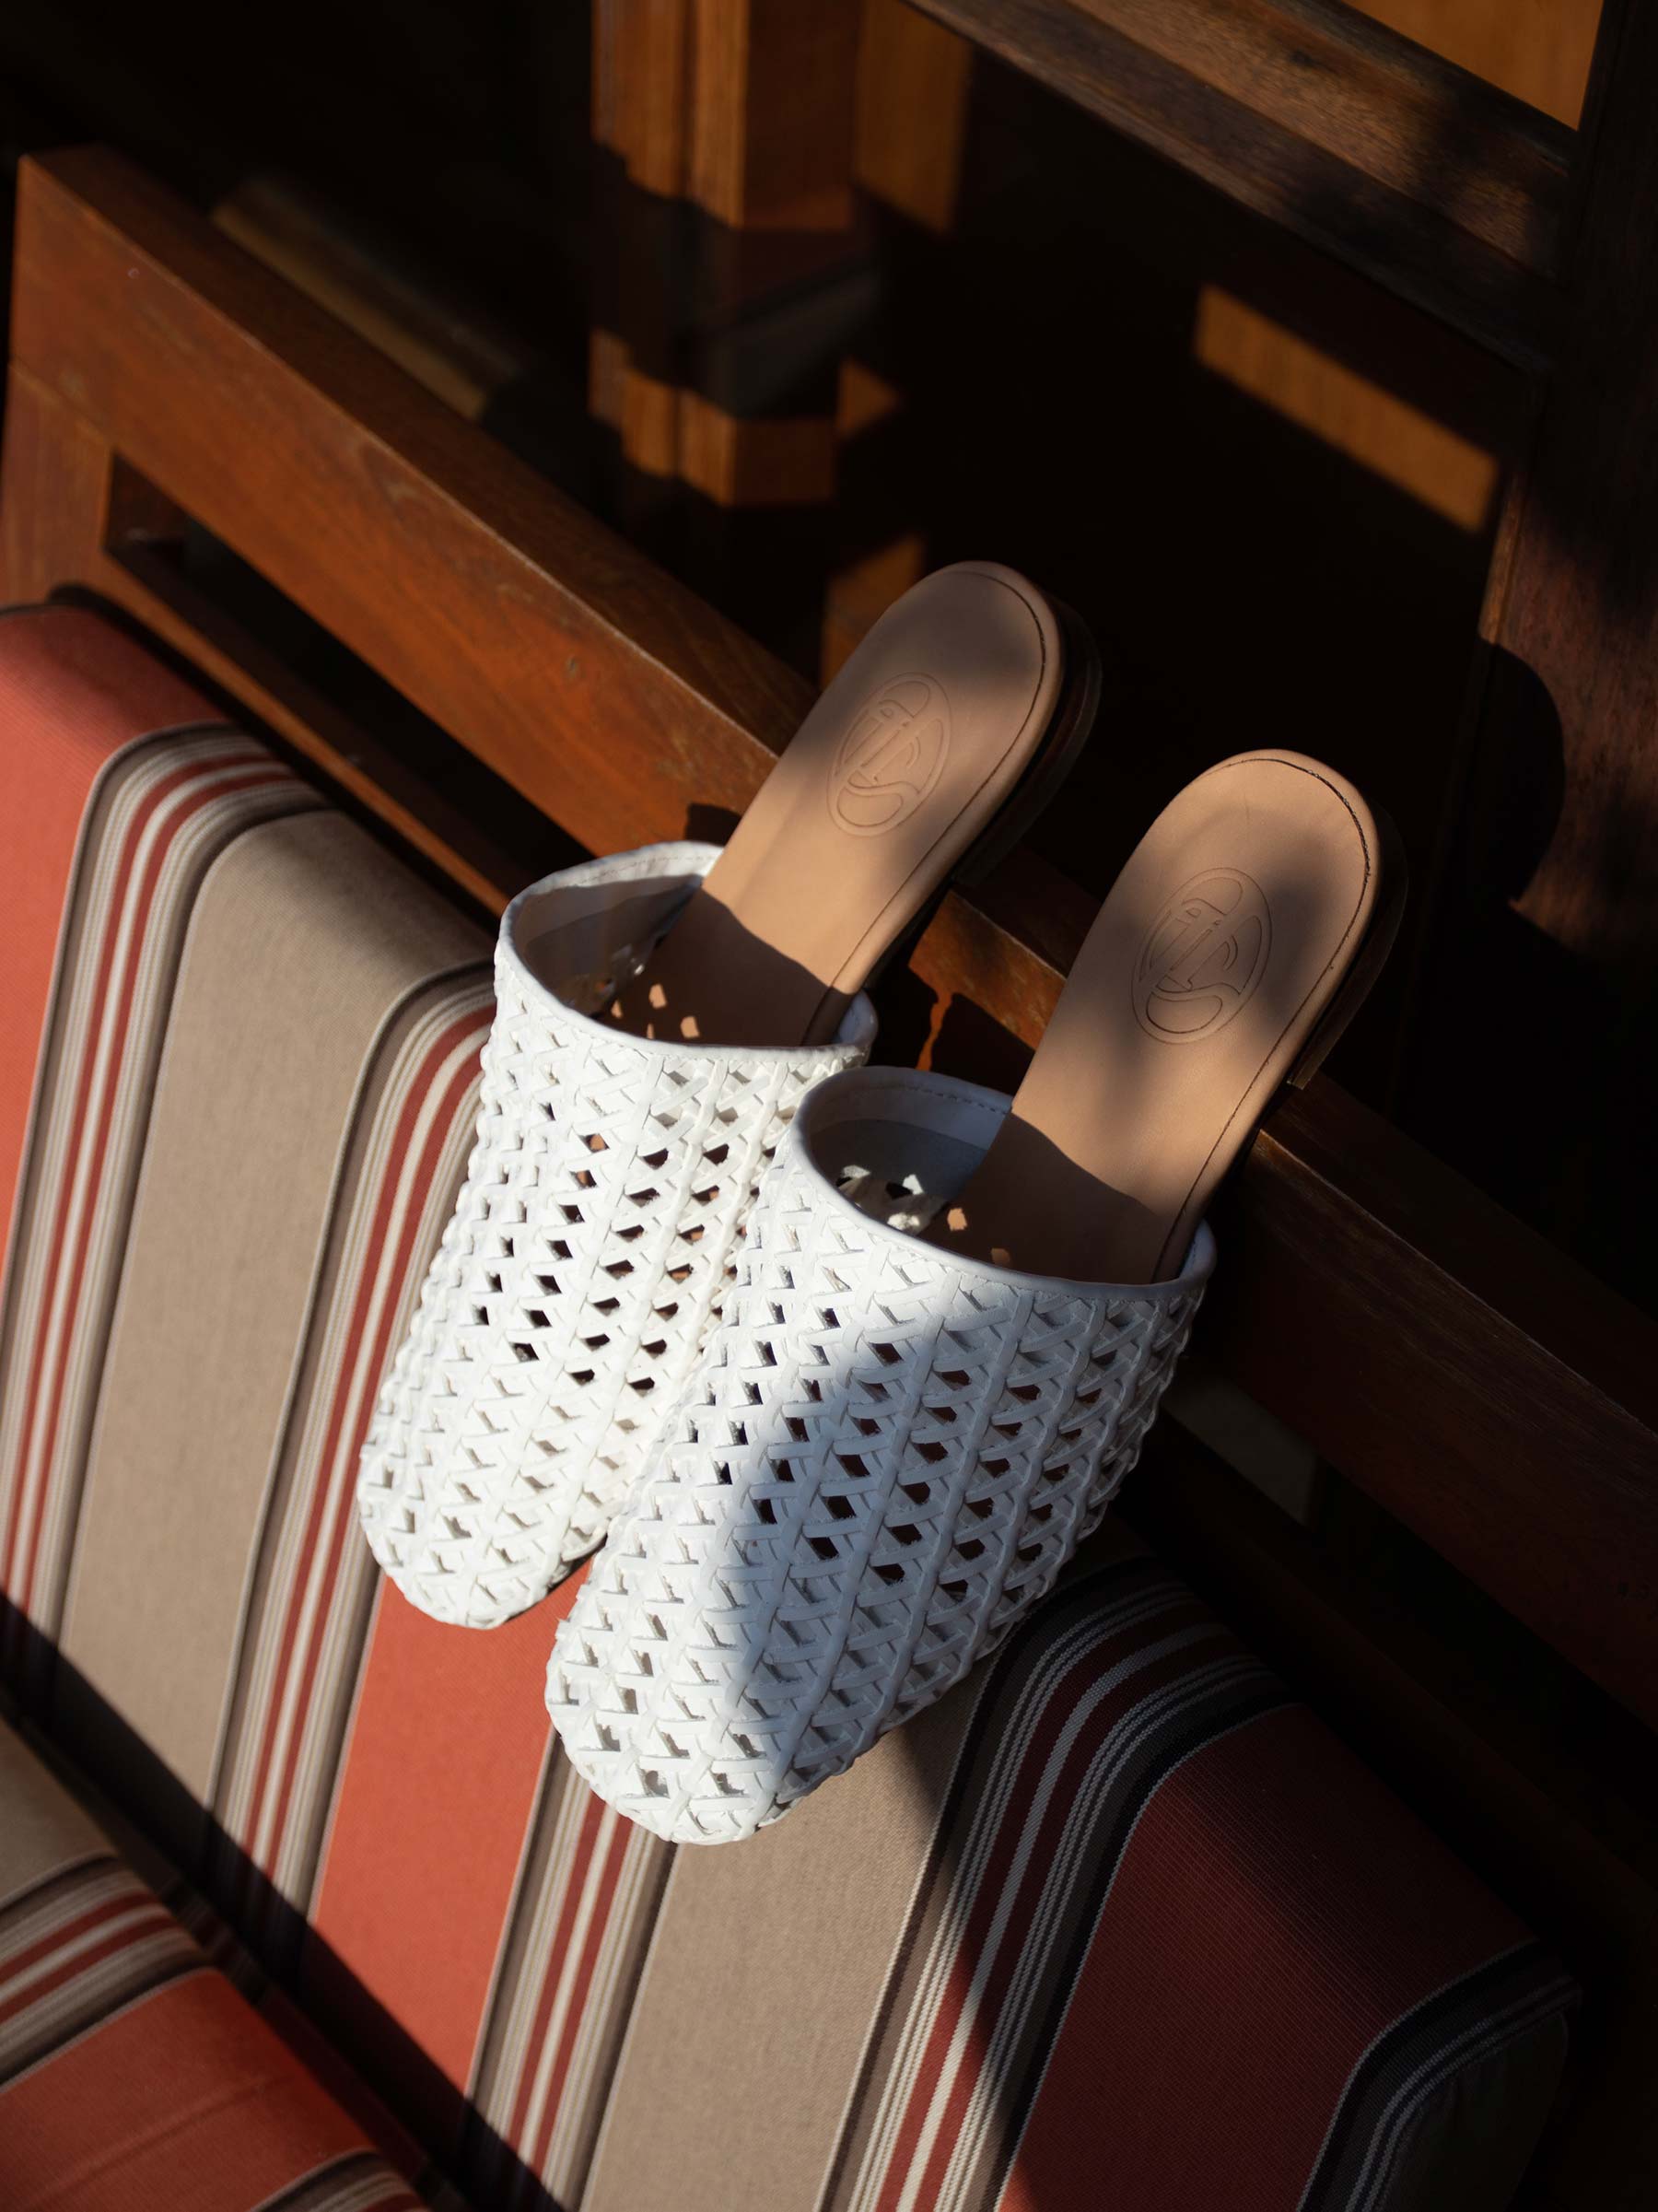 Woven Leather Mules